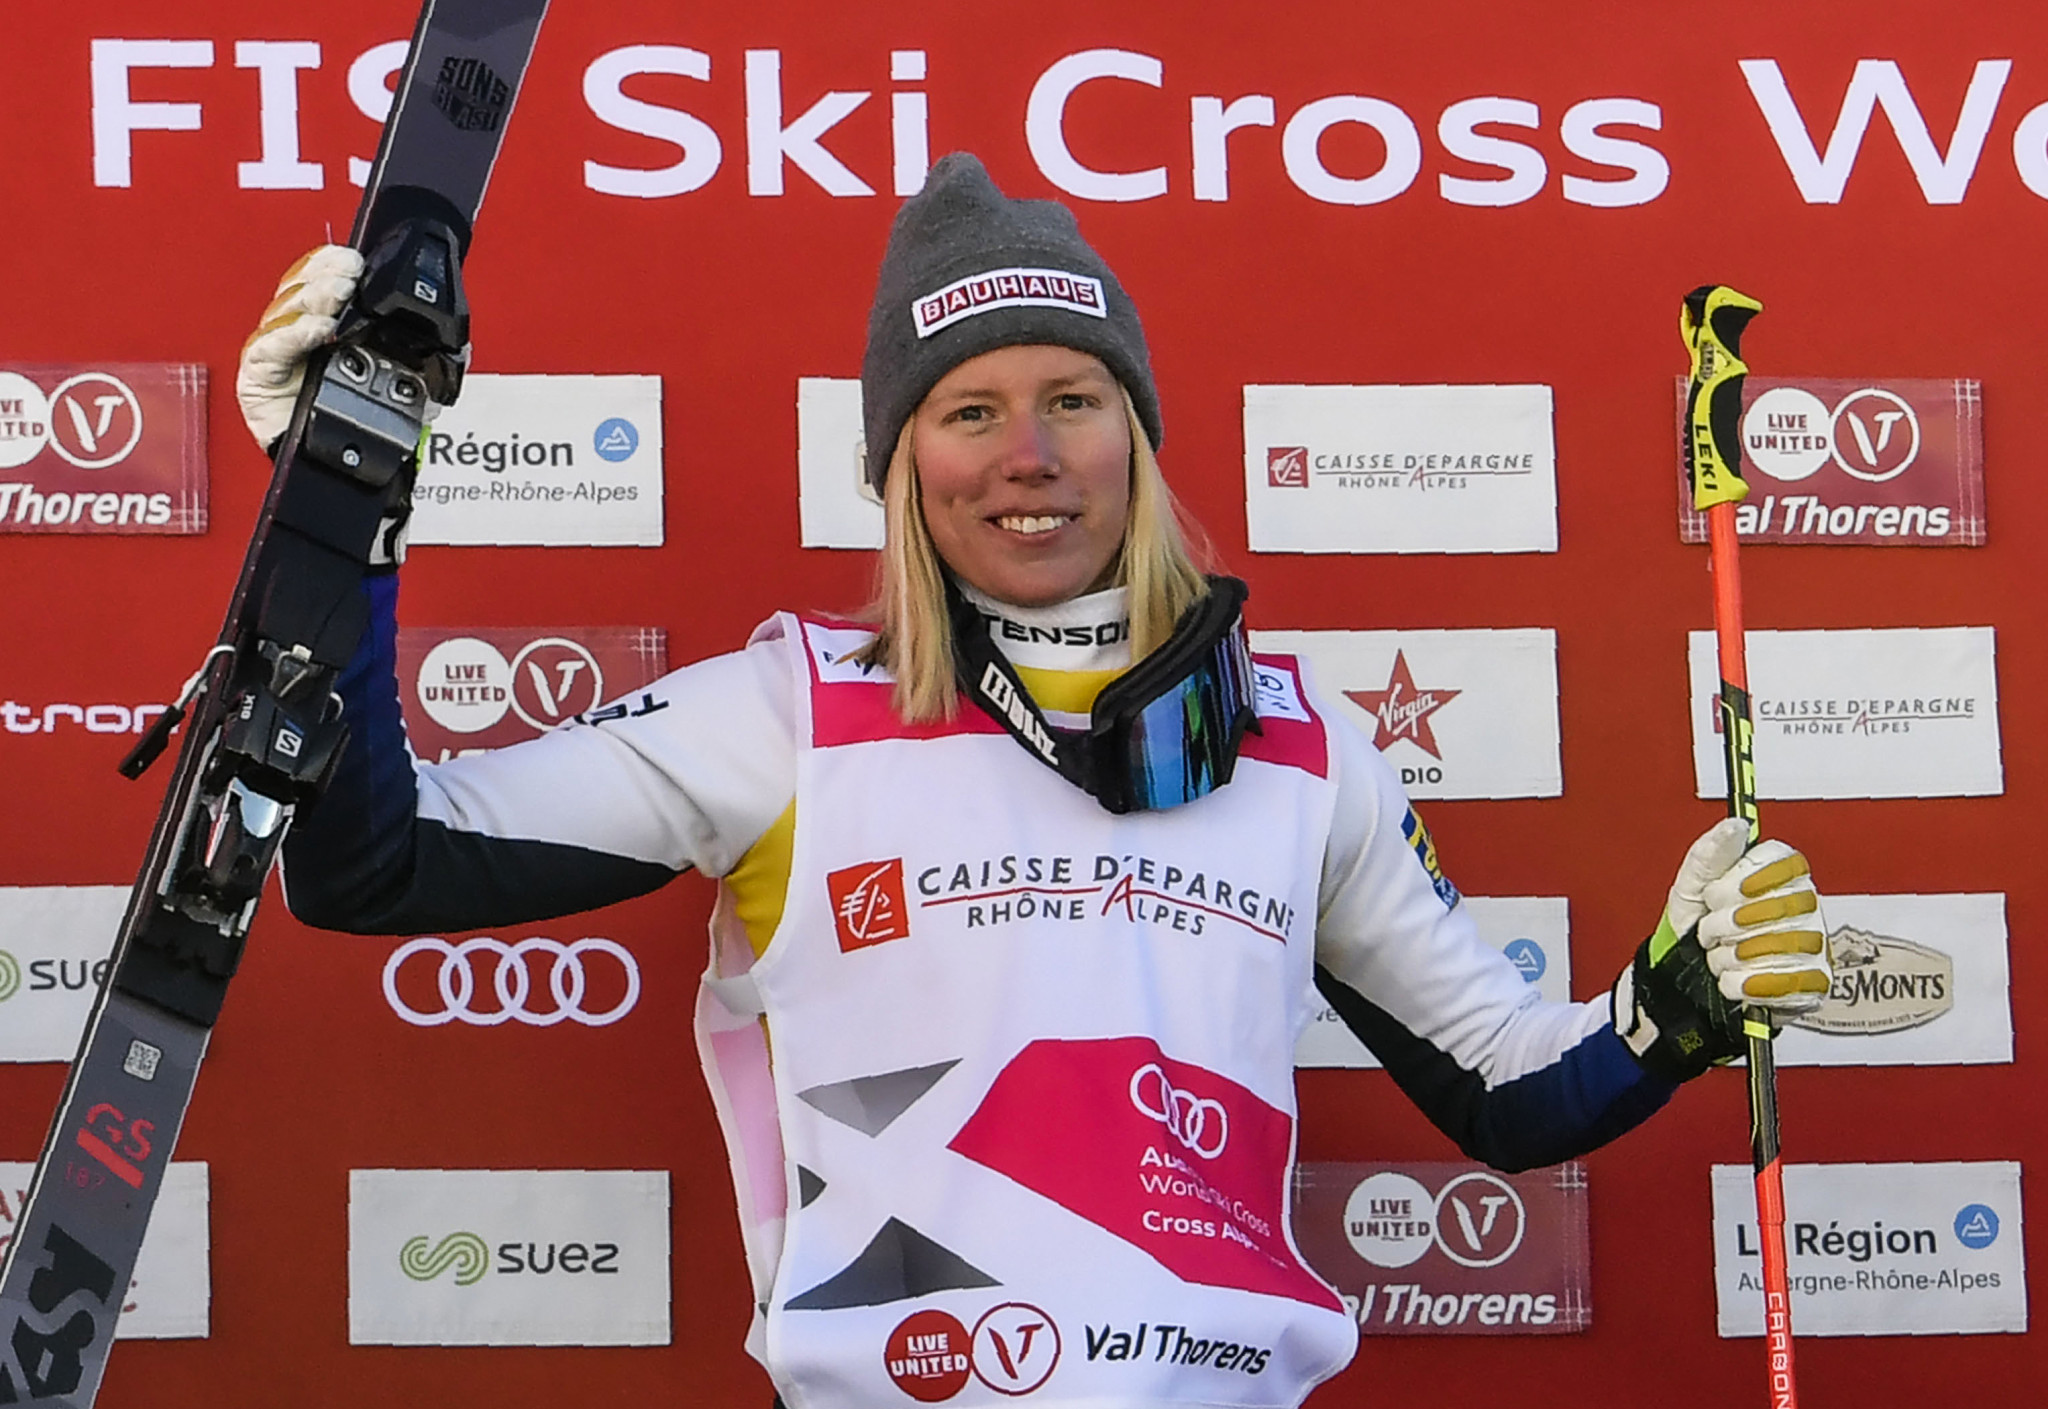 Sandra Näslund of Sweden got her season off to a winning start at the FIS Ski Cross World Cup event in the French resort of Val Thorens ©Getty Images